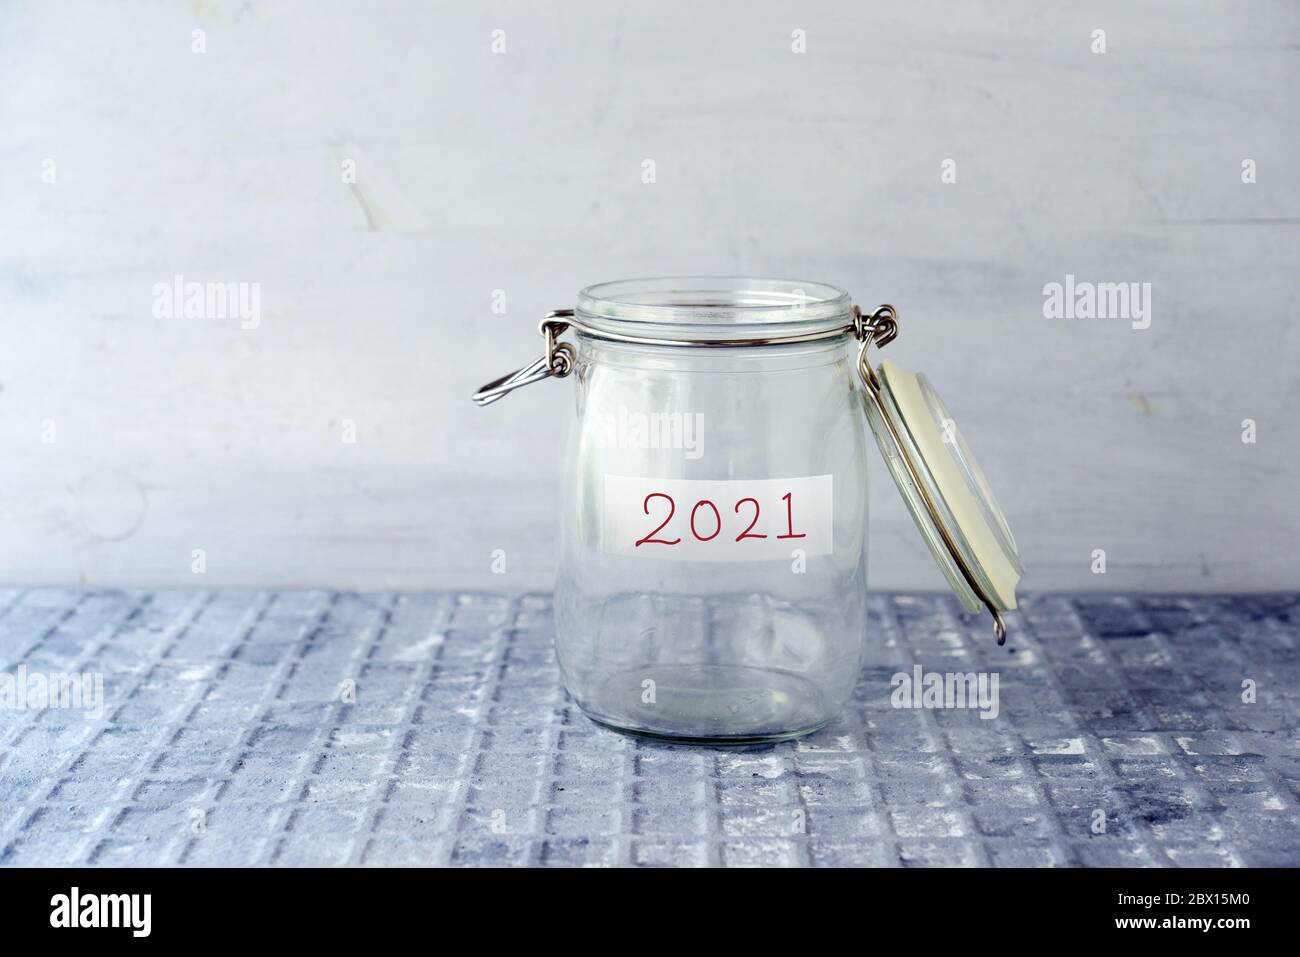 Coins in glass money jar with 2021 label, financial concept. Stock Photo